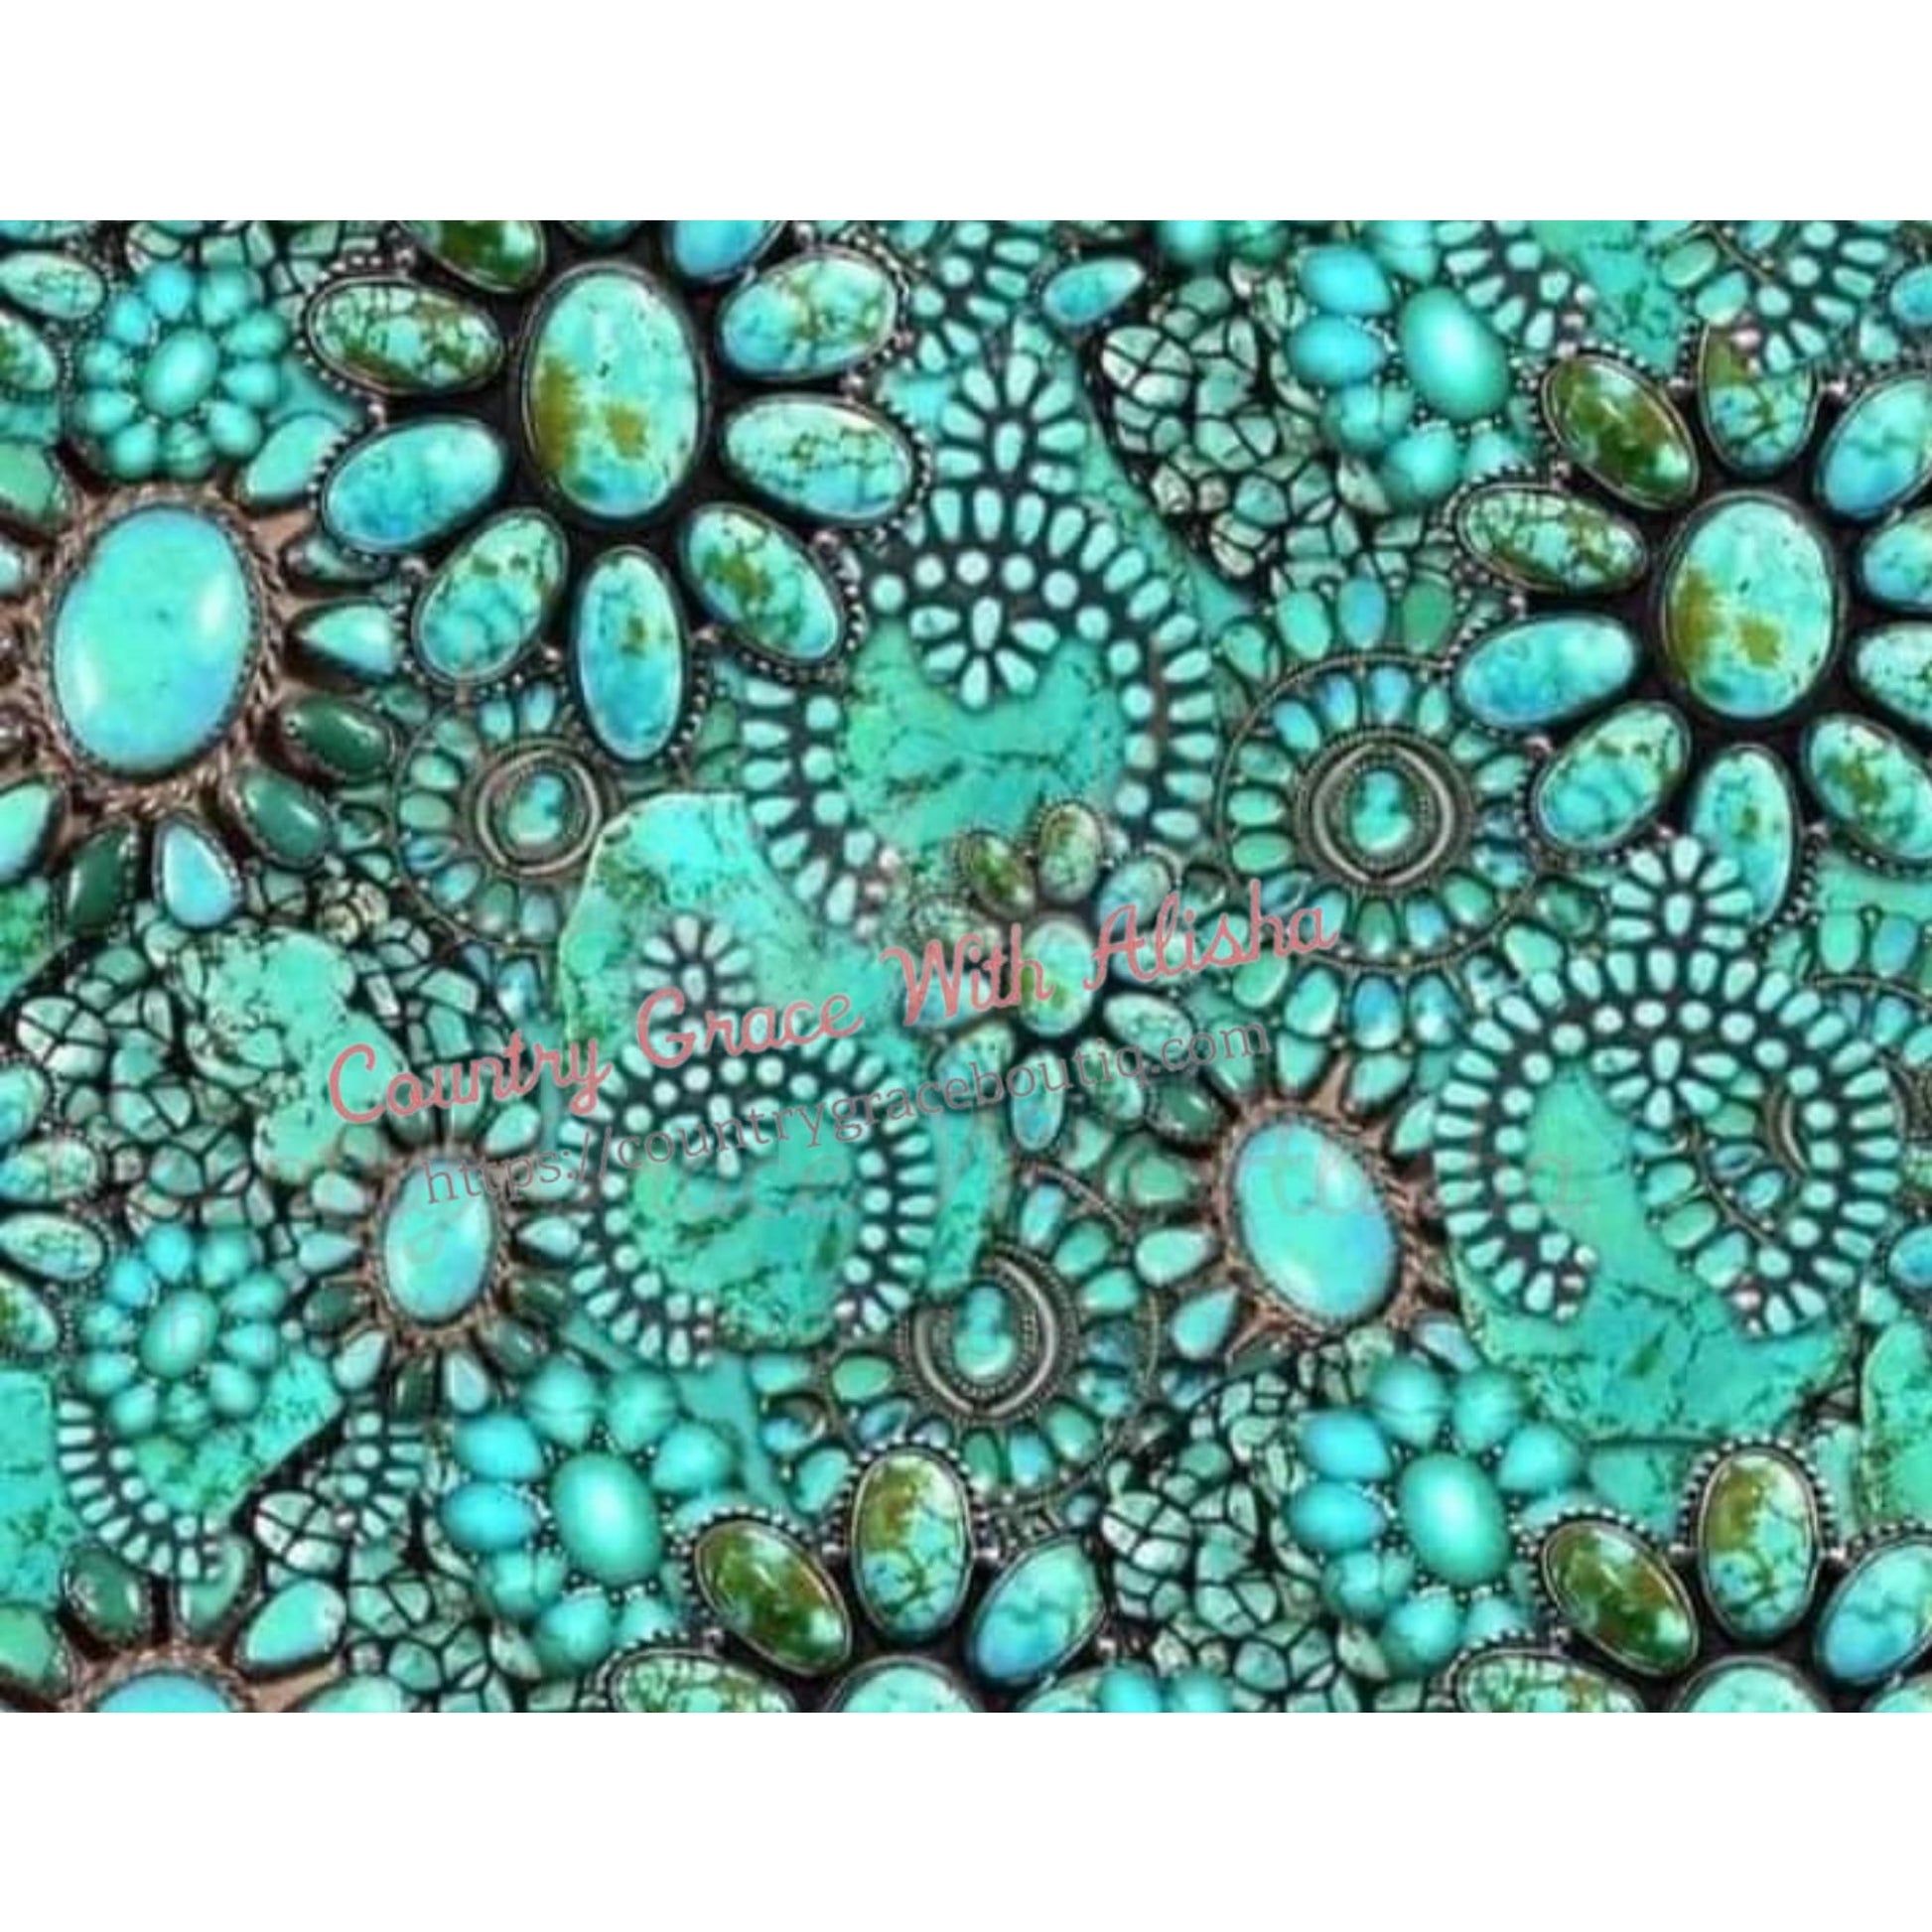 Turquoise Full Page Sublimation Transfer - Sub $2.50 Country